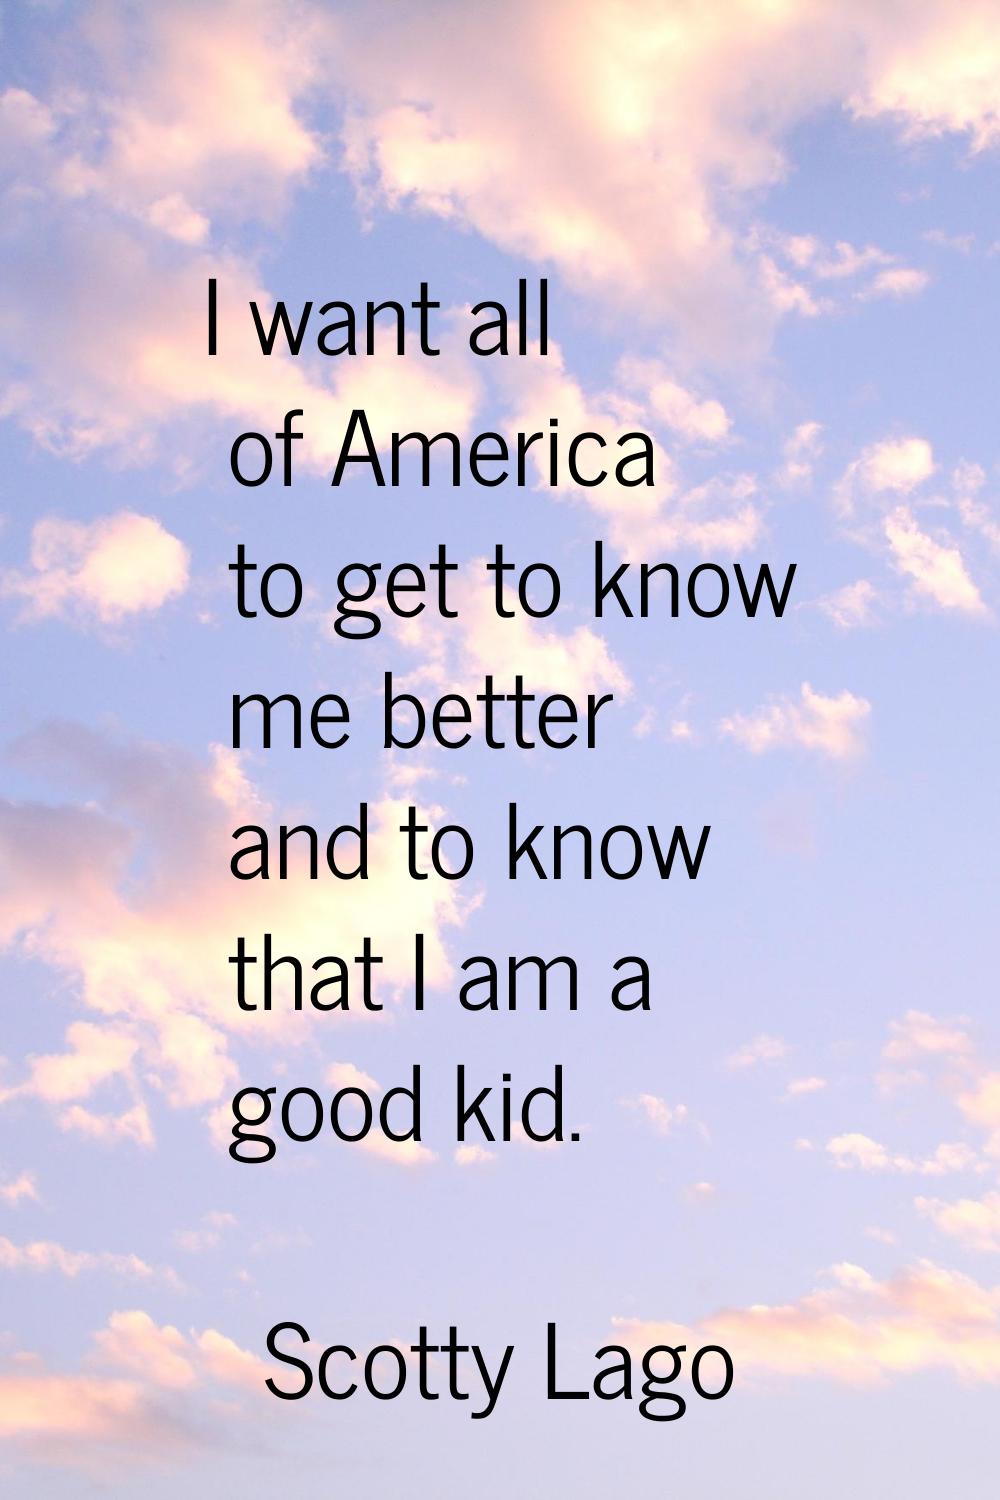 I want all of America to get to know me better and to know that I am a good kid.